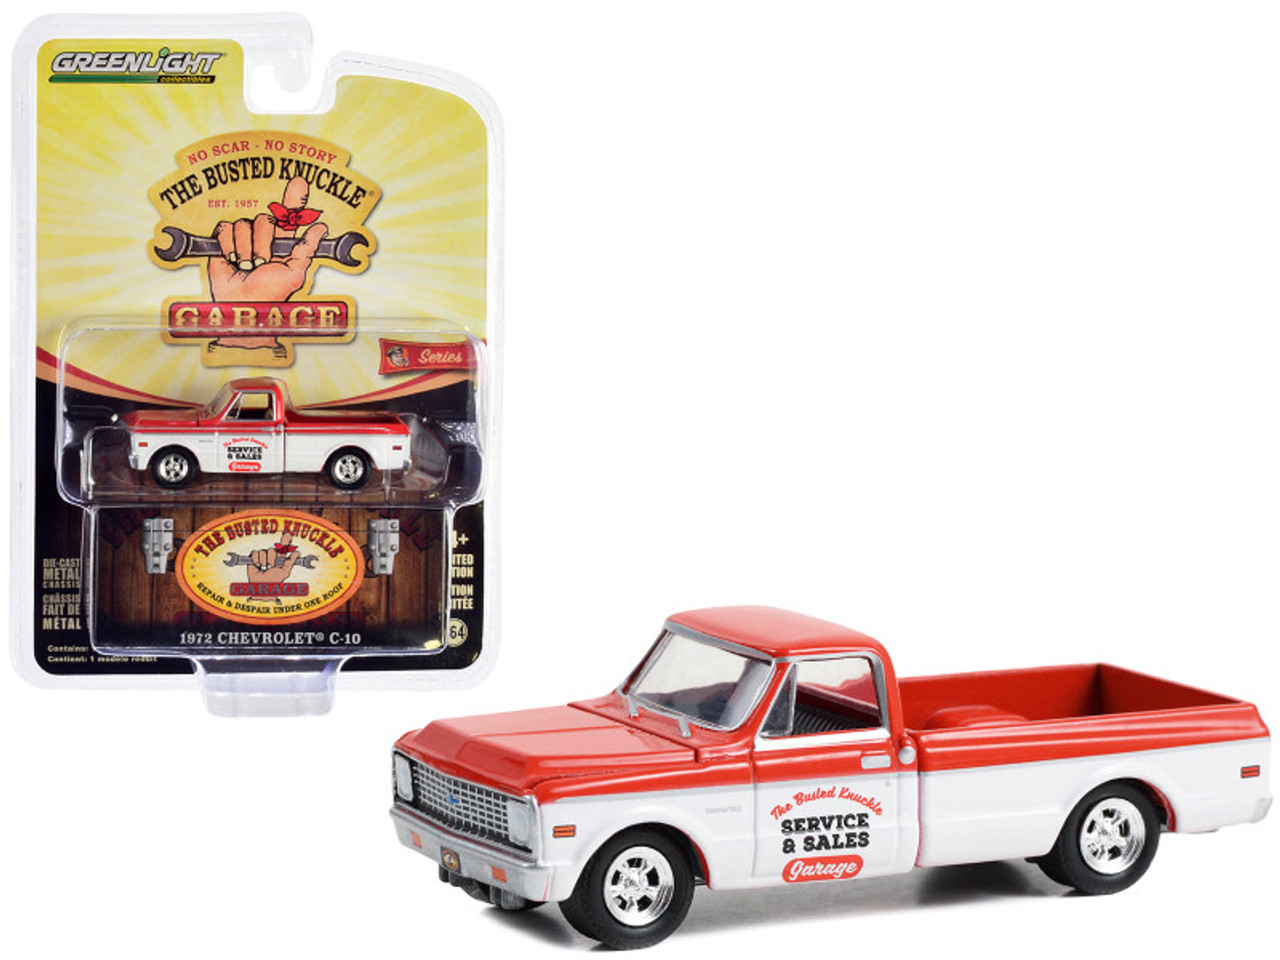 1972 Chevrolet C-10 Shortbed Pickup Truck Red and White "The Busted Knuckle Garage Service & Sales" "Busted Knuckle Garage" Series 2 1/64 Diecast Model Car by Greenlight